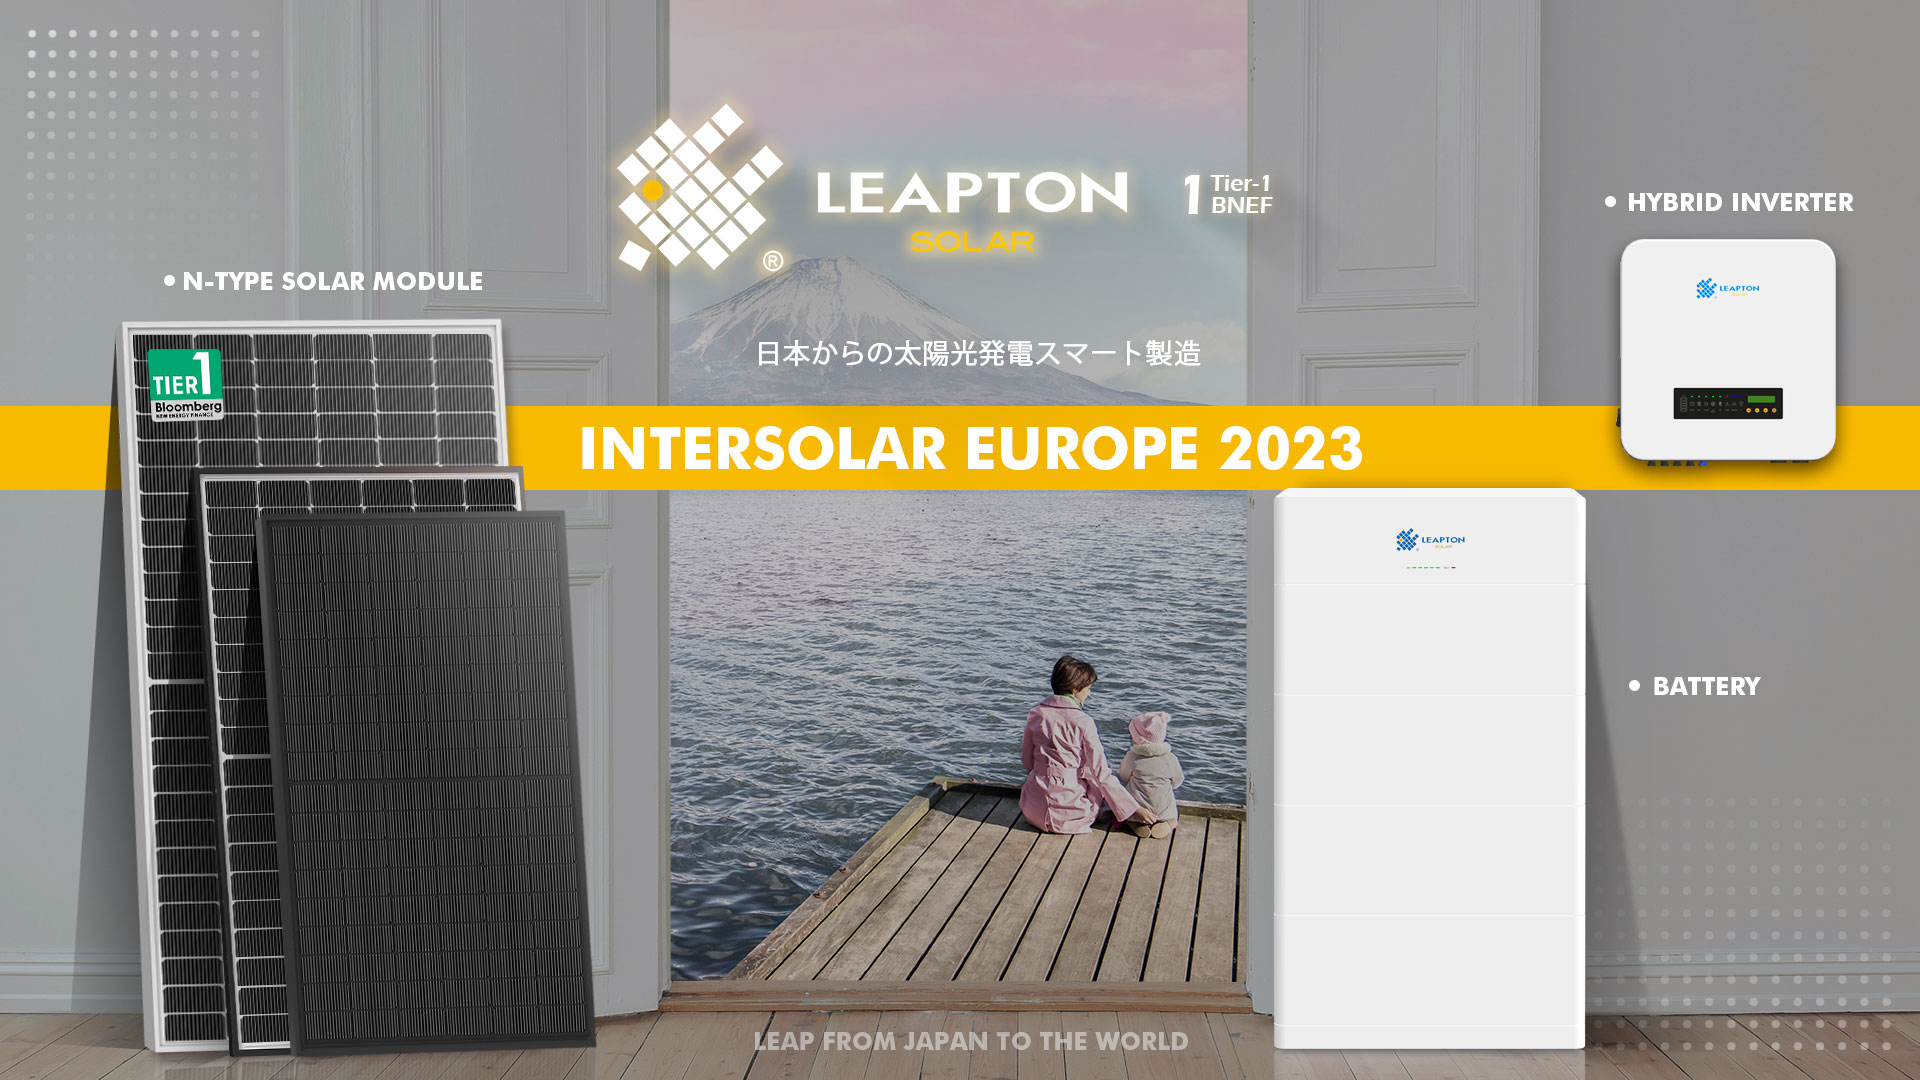 Leapton Energy is currently at the Intersolar 2023